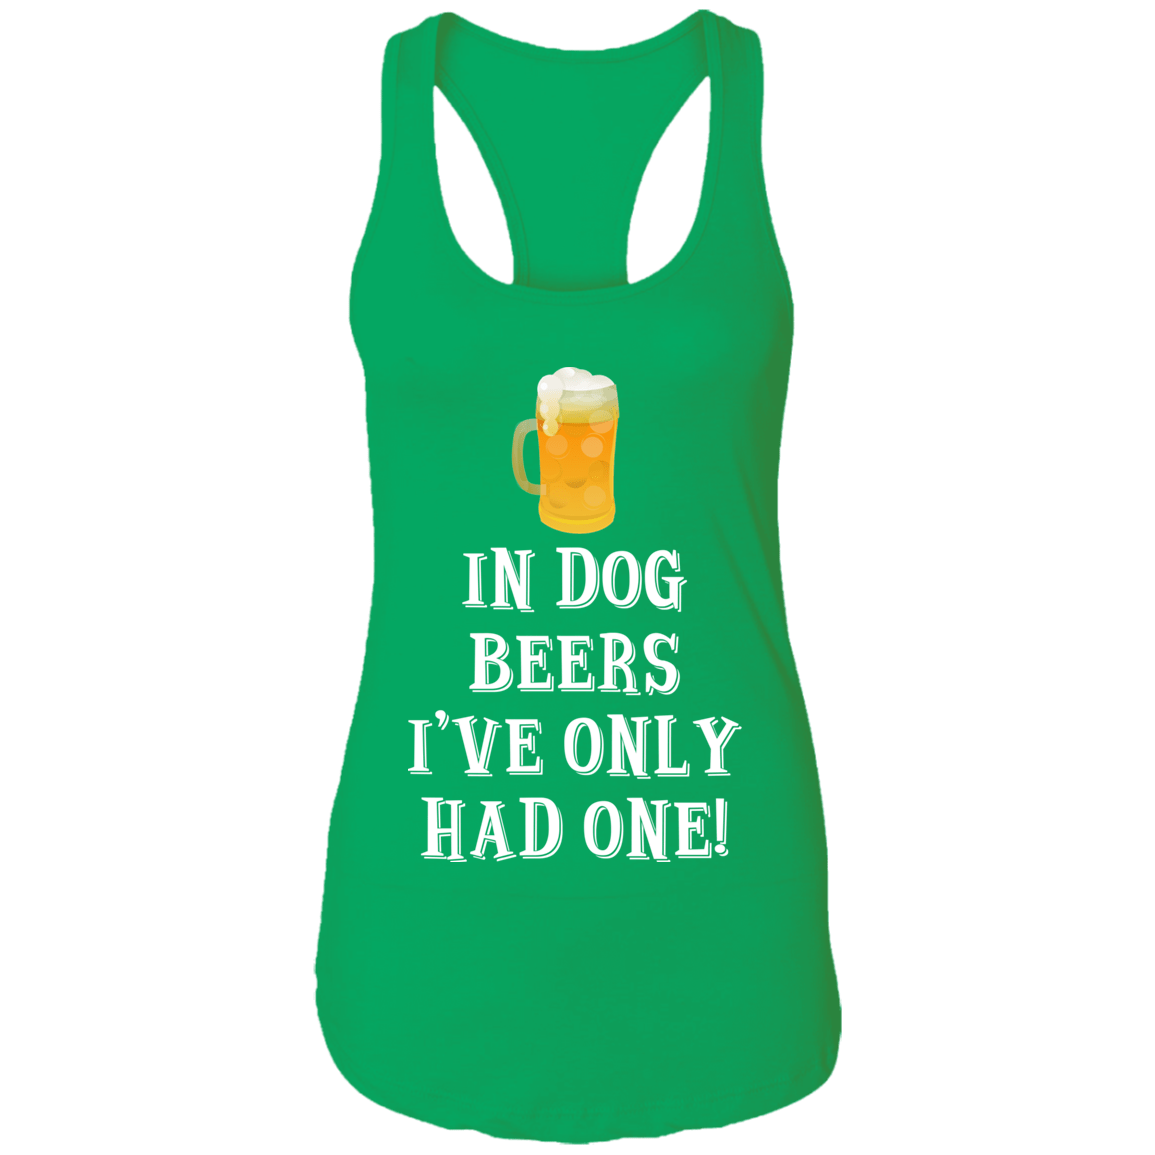 In Dog Beers I've Only Had One - Ladies Racer Back Tank.